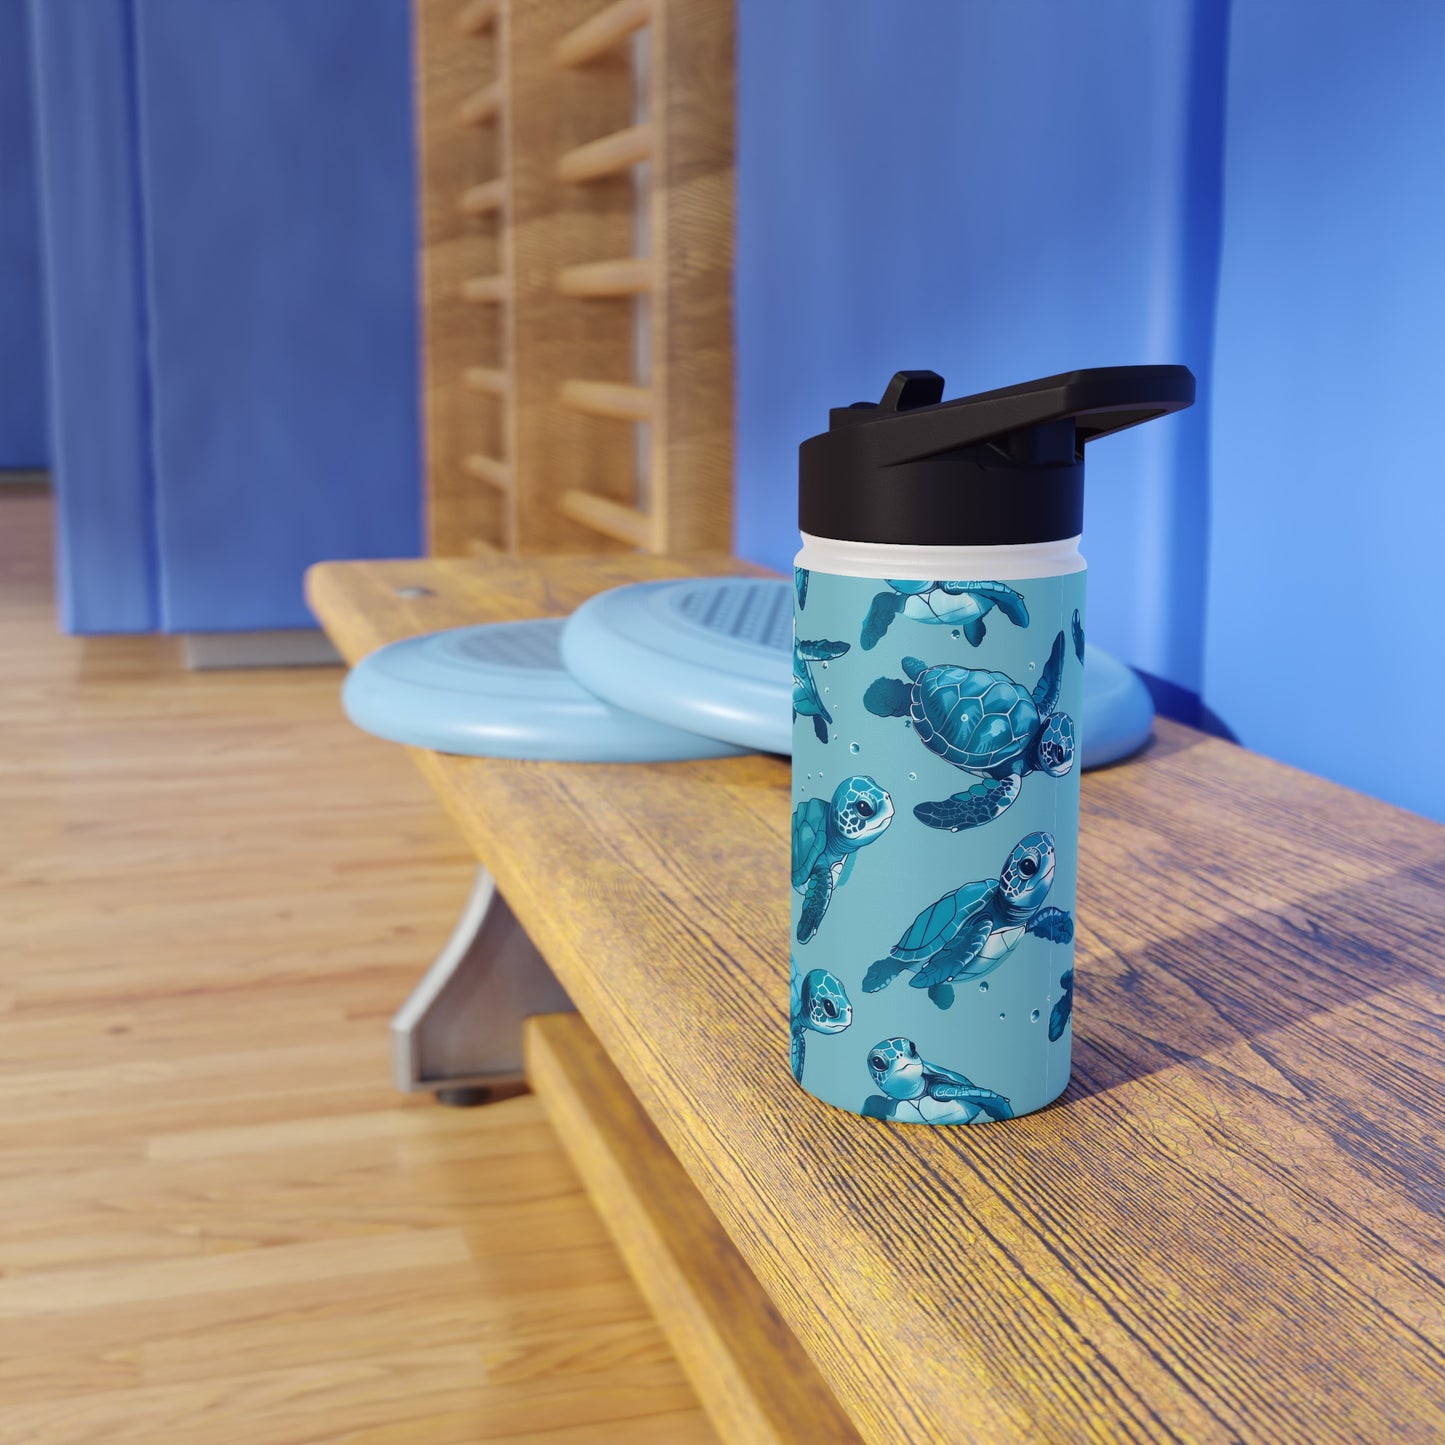 Insulated Water Bottle, 12oz, Cute Baby Sea Turtles - Double Walled Stainless Steel Thermos, Keeps Drinks Hot or Cold